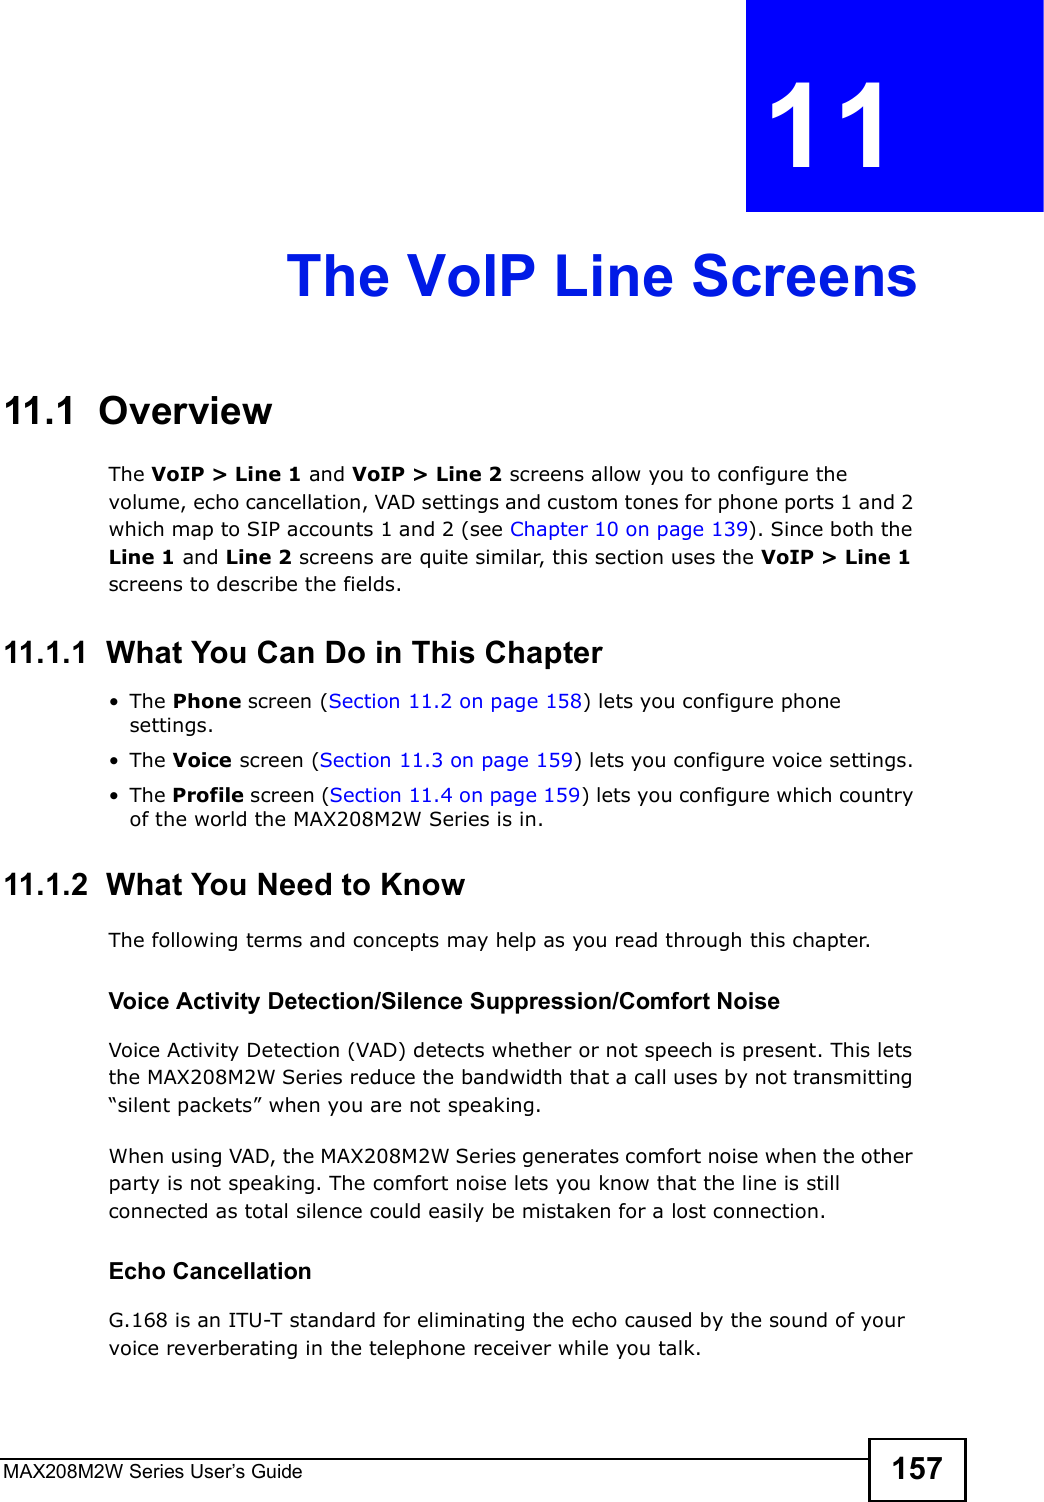 MAX208M2W Series User s Guide 157CHAPTER  11 The VoIP Line Screens11.1  OverviewThe VoIP &gt; Line 1 and VoIP &gt; Line 2 screens allow you to configure the volume, echo cancellation, VAD settings and custom tones for phone ports 1 and 2 which map to SIP accounts 1 and 2 (see Chapter 10 on page 139). Since both the Line 1 and Line 2 screens are quite similar, this section uses the VoIP &gt; Line 1 screens to describe the fields.11.1.1  What You Can Do in This Chapter!The Phone screen (Section 11.2 on page 158) lets you configure phone settings.!The Voice screen (Section 11.3 on page 159) lets you configure voice settings.!The Profile screen (Section 11.4 on page 159) lets you configure which country of the world the MAX208M2W Series is in.11.1.2  What You Need to KnowThe following terms and concepts may help as you read through this chapter.Voice Activity Detection/Silence Suppression/Comfort NoiseVoice Activity Detection (VAD) detects whether or not speech is present. This lets the MAX208M2W Series reduce the bandwidth that a call uses by not transmitting &quot;silent packets# when you are not speaking.When using VAD, the MAX208M2W Series generates comfort noise when the other party is not speaking. The comfort noise lets you know that the line is still connected as total silence could easily be mistaken for a lost connection.Echo Cancellation G.168 is an ITU-T standard for eliminating the echo caused by the sound of your voice reverberating in the telephone receiver while you talk.